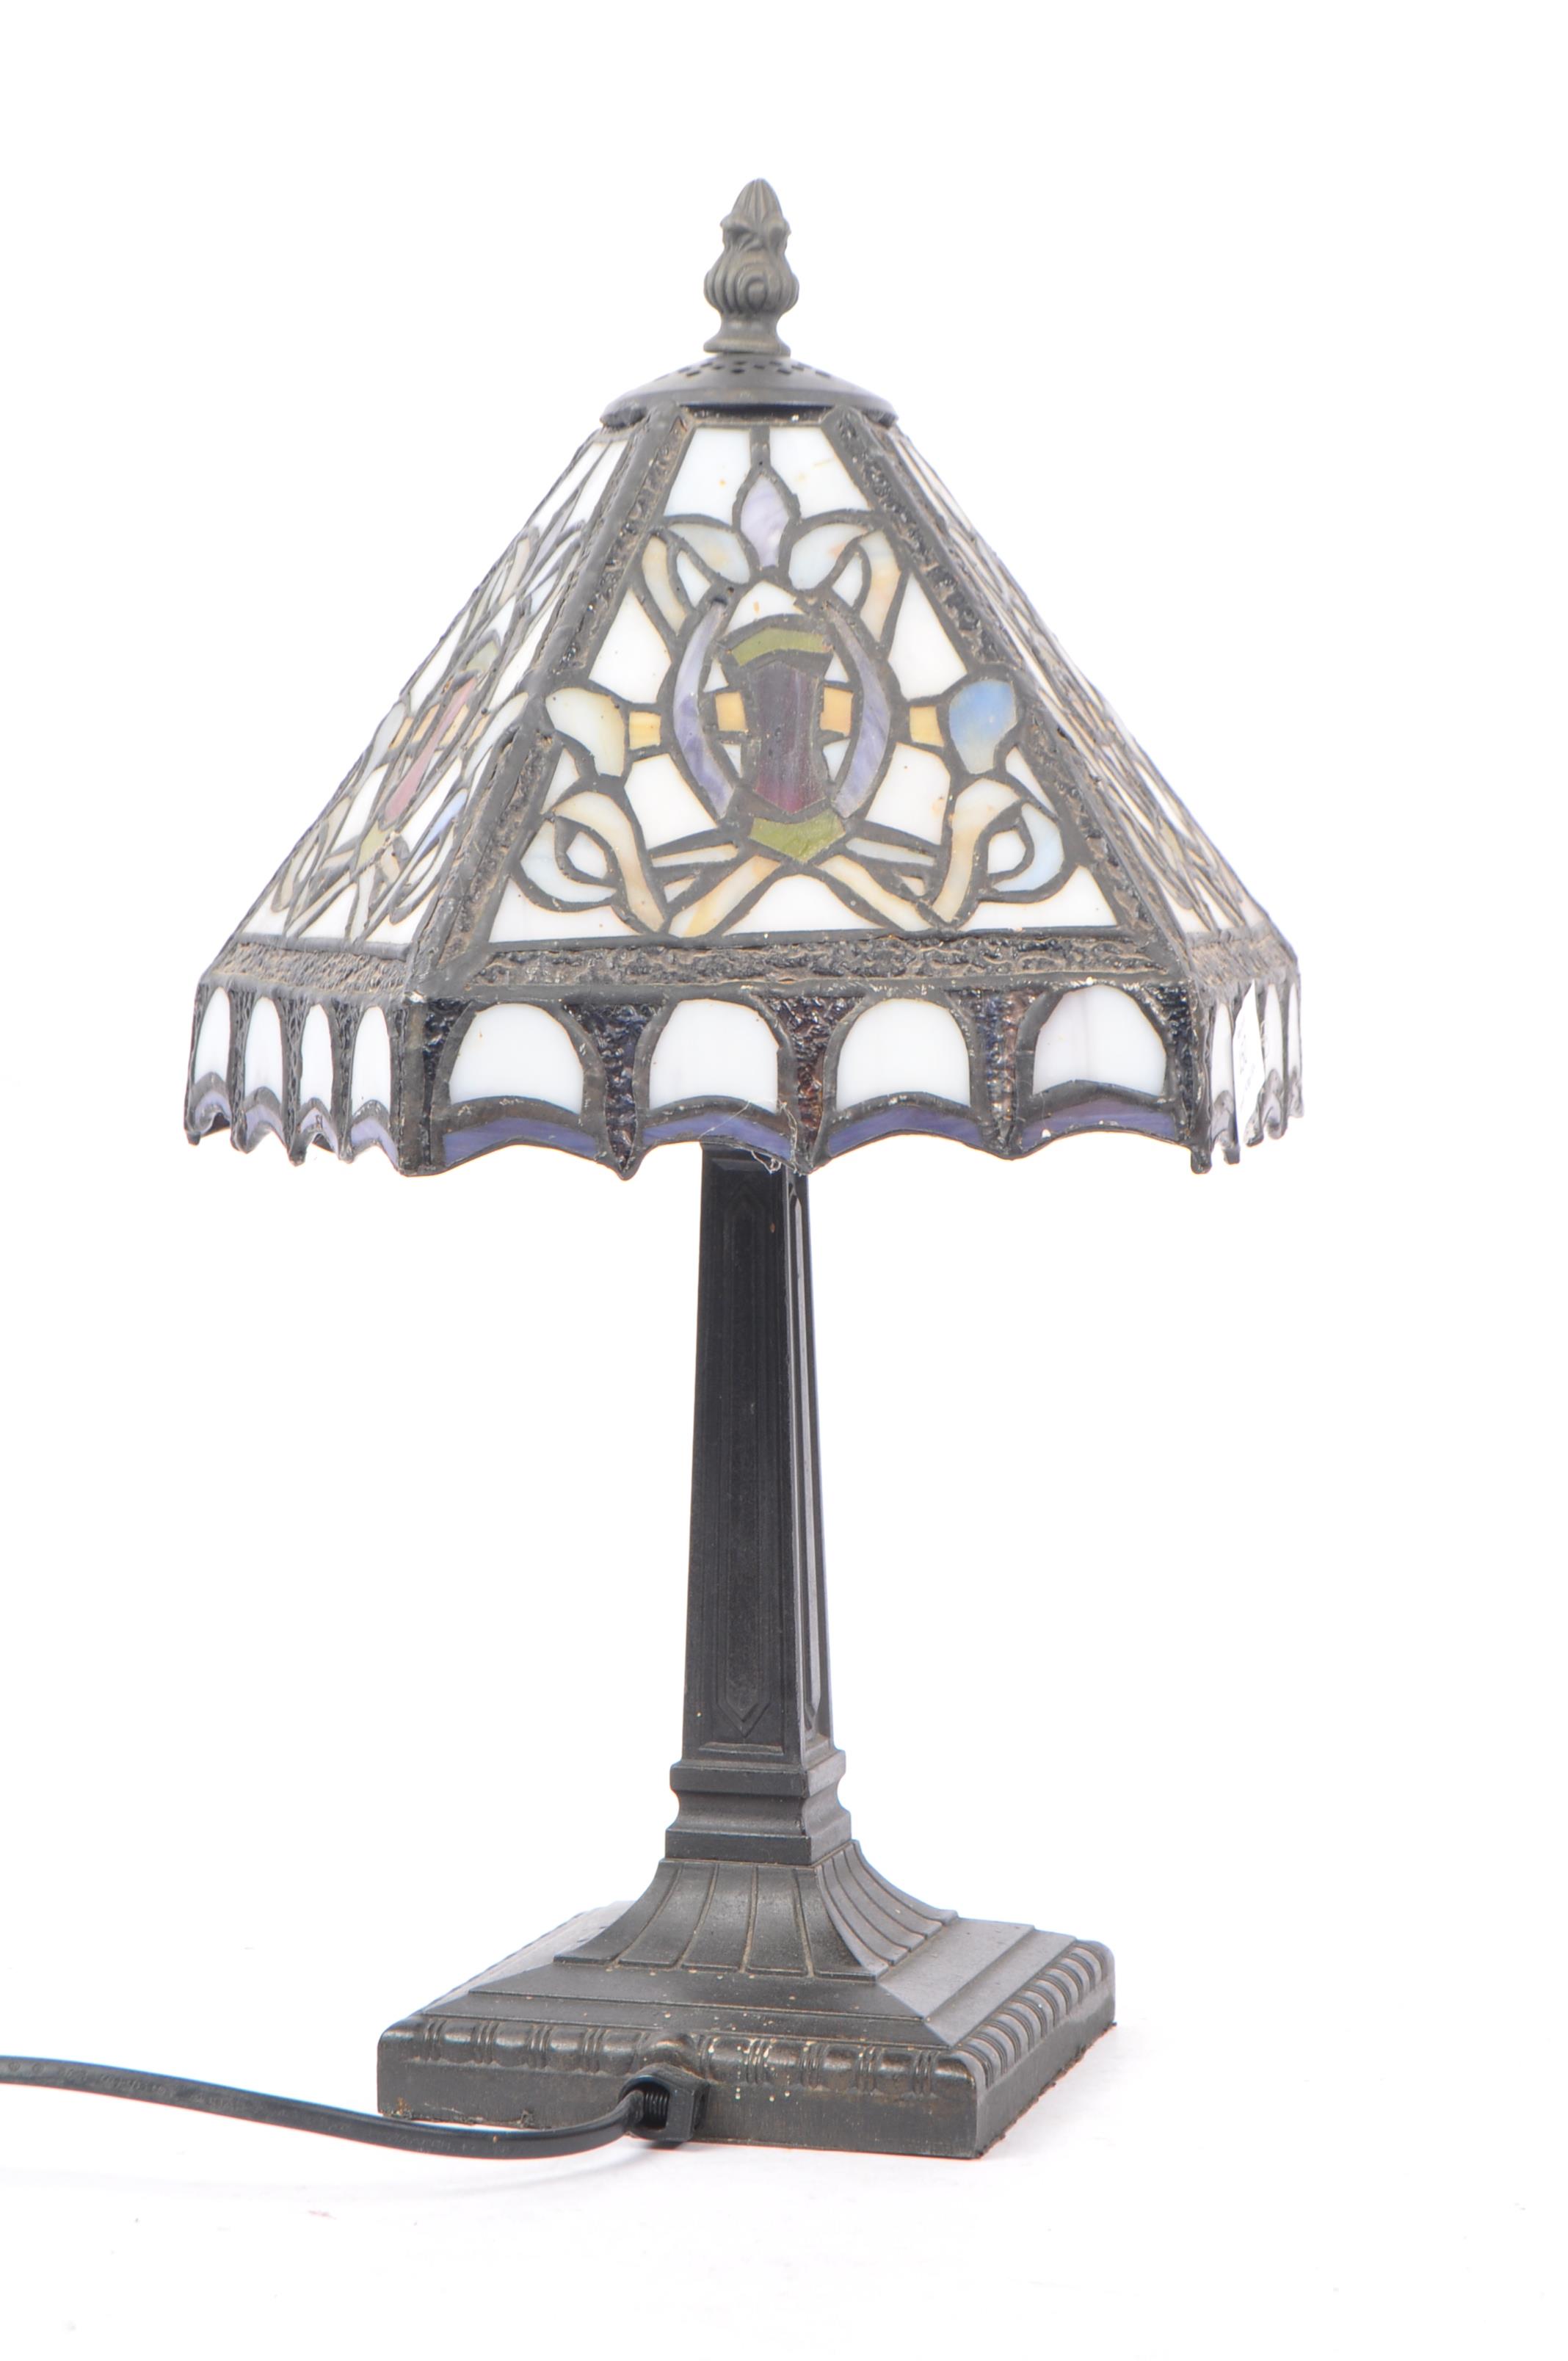 TIFFANY STYLE - 20TH CENTURY STAINED GLASS BEDSIDE LAMP - Image 3 of 5